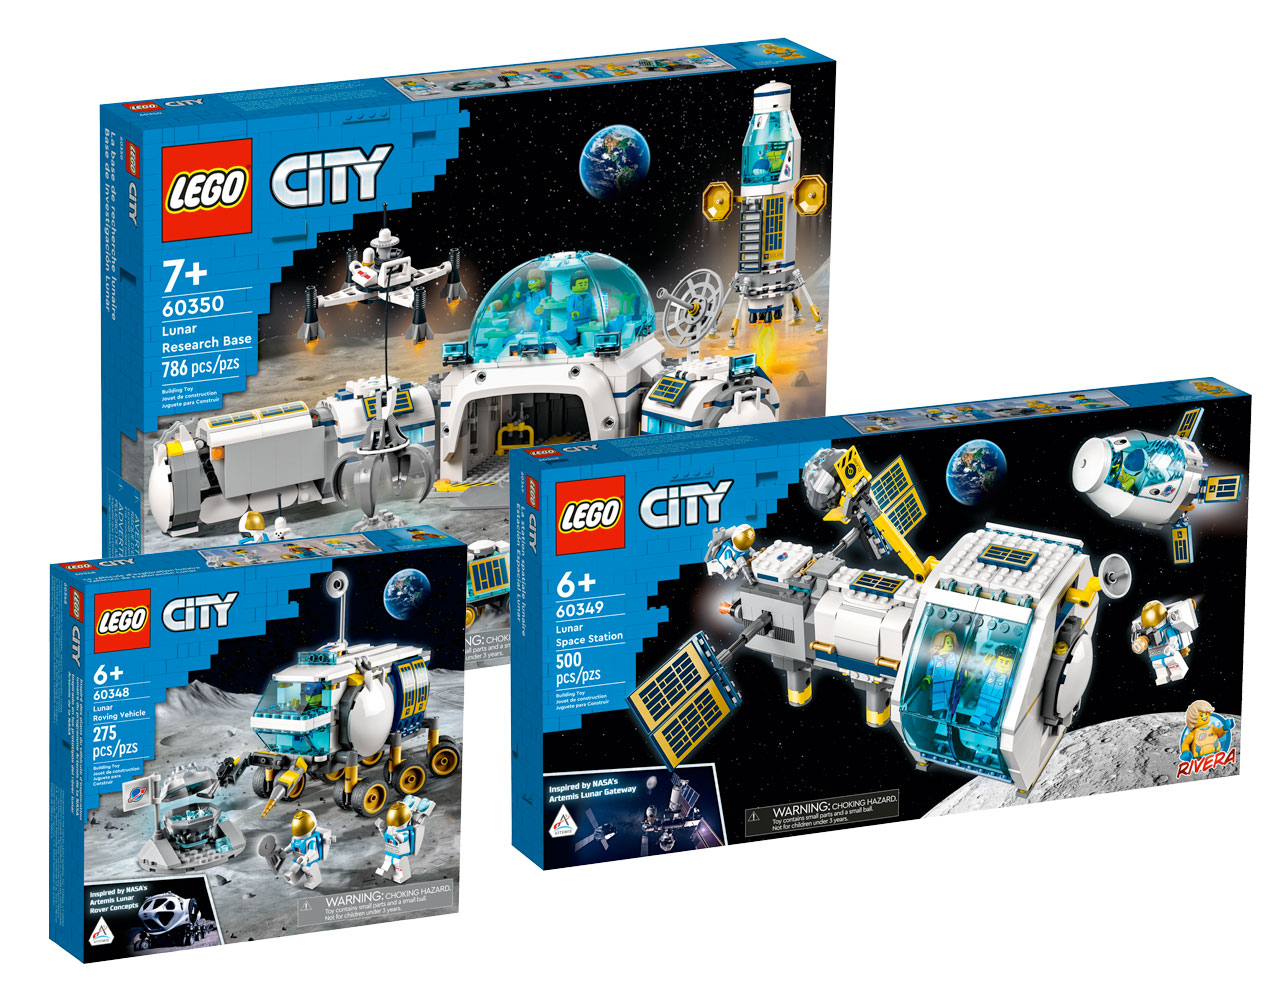 In addition to the Rocket Launch Center with its version of NASA's Space Launch System (SLS) rocket, the new Lego City Space sets include the Lunar Research Base, Lunar Roving Vehicle and Lunar Space Station.